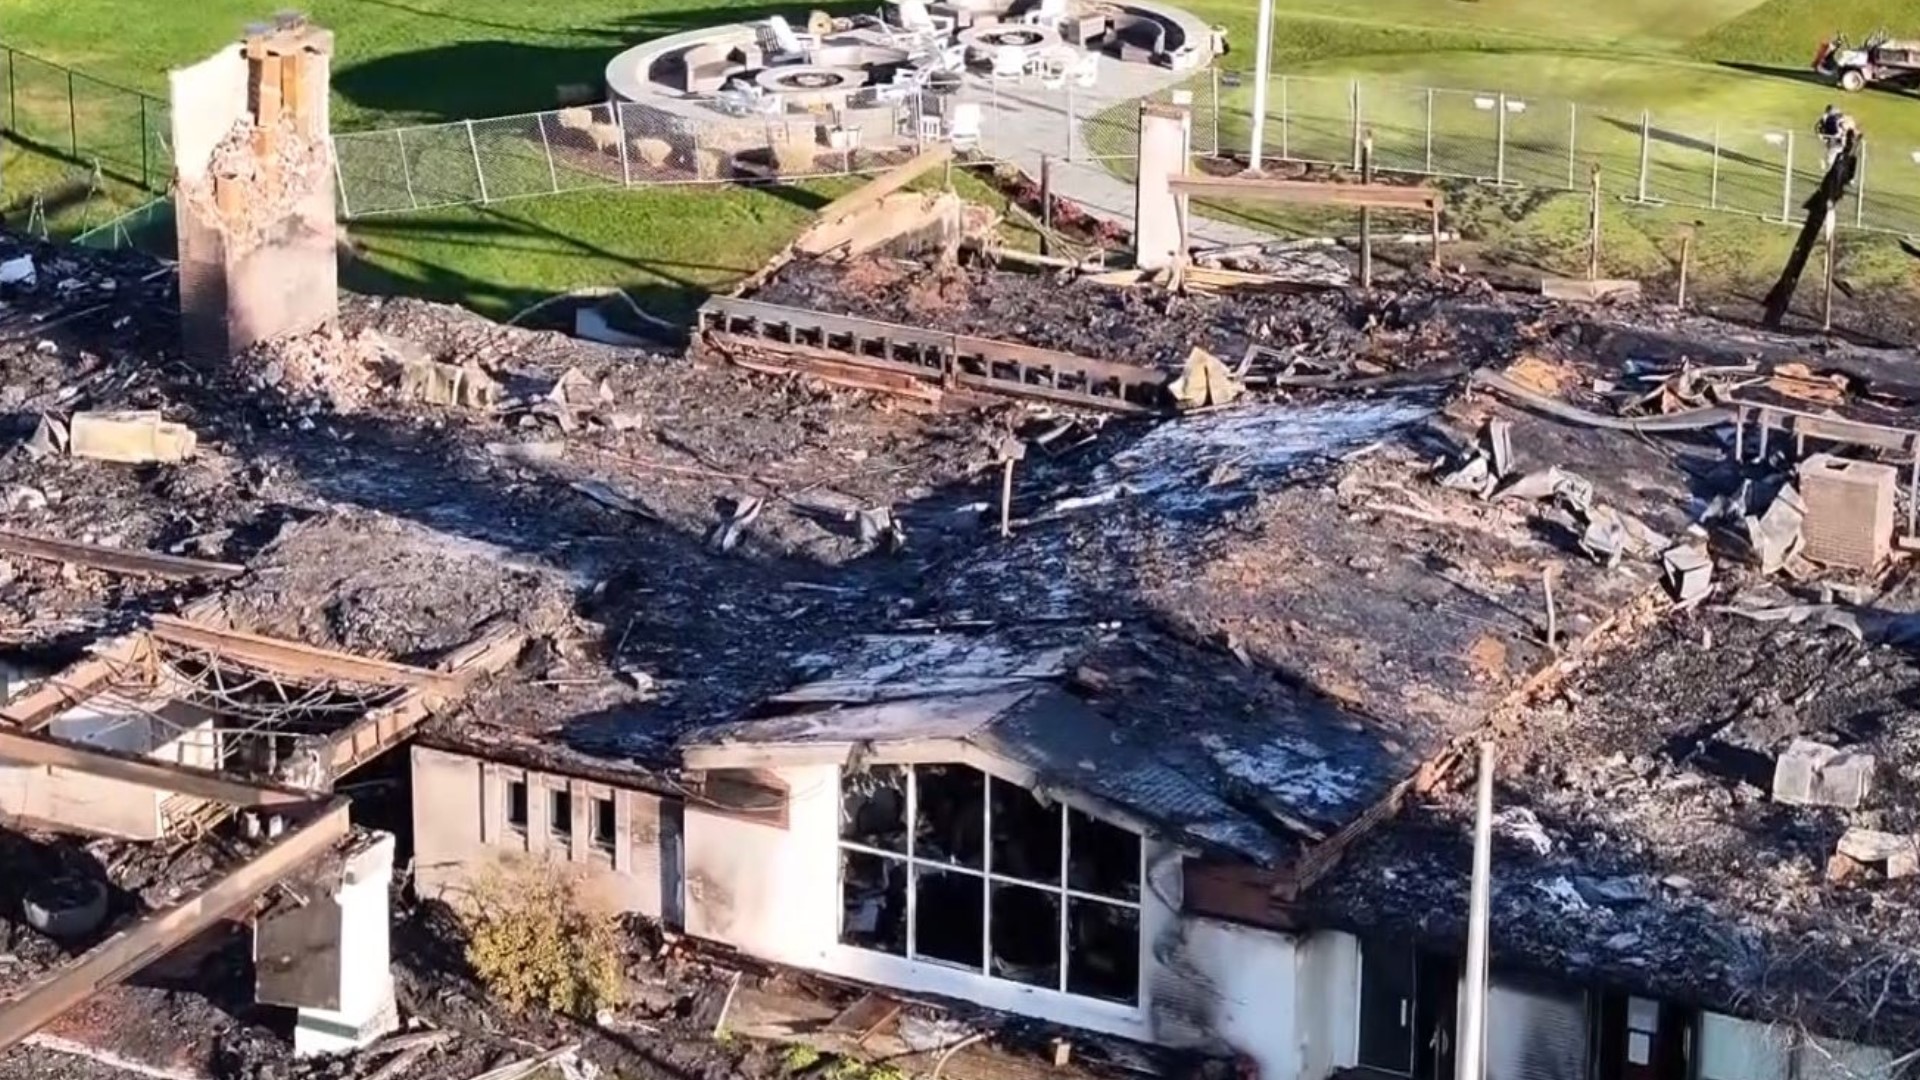 Many events have been canceled after two fires ripped through the Wampanoag Country Club, including a high school prom for that same weekend.